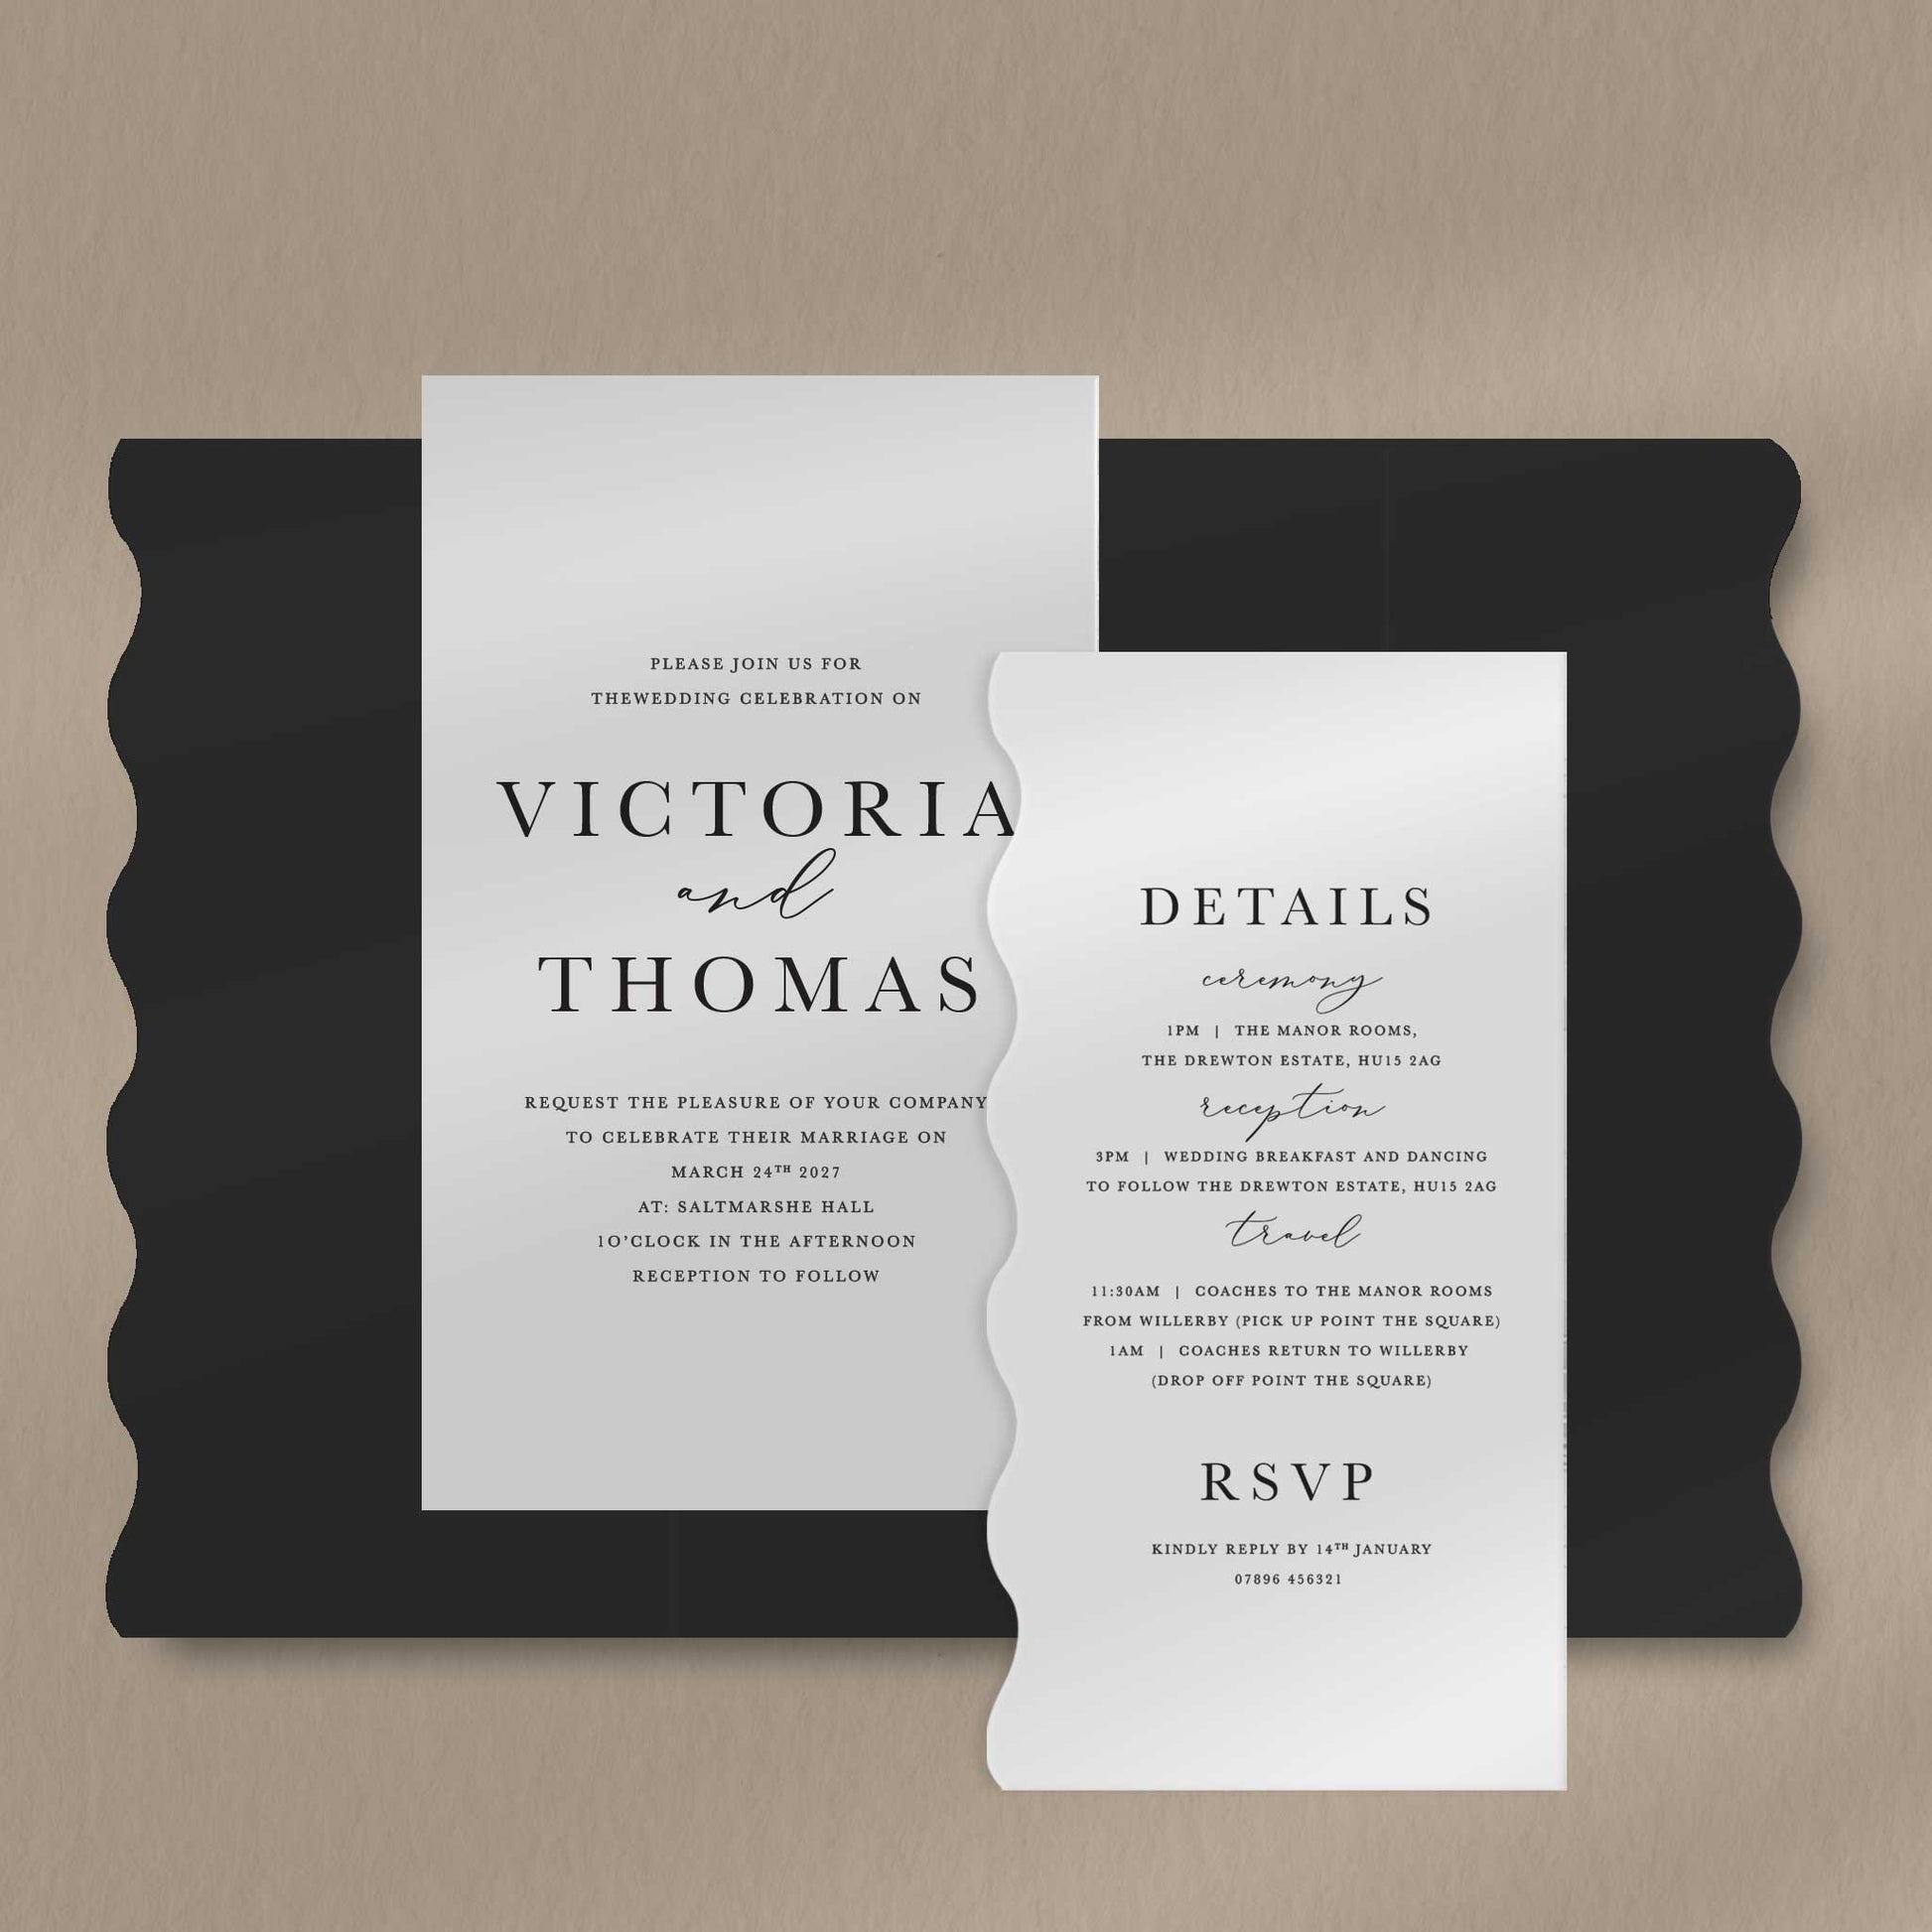 Scallop Envelope Sample  Ivy and Gold Wedding Stationery Victoria  